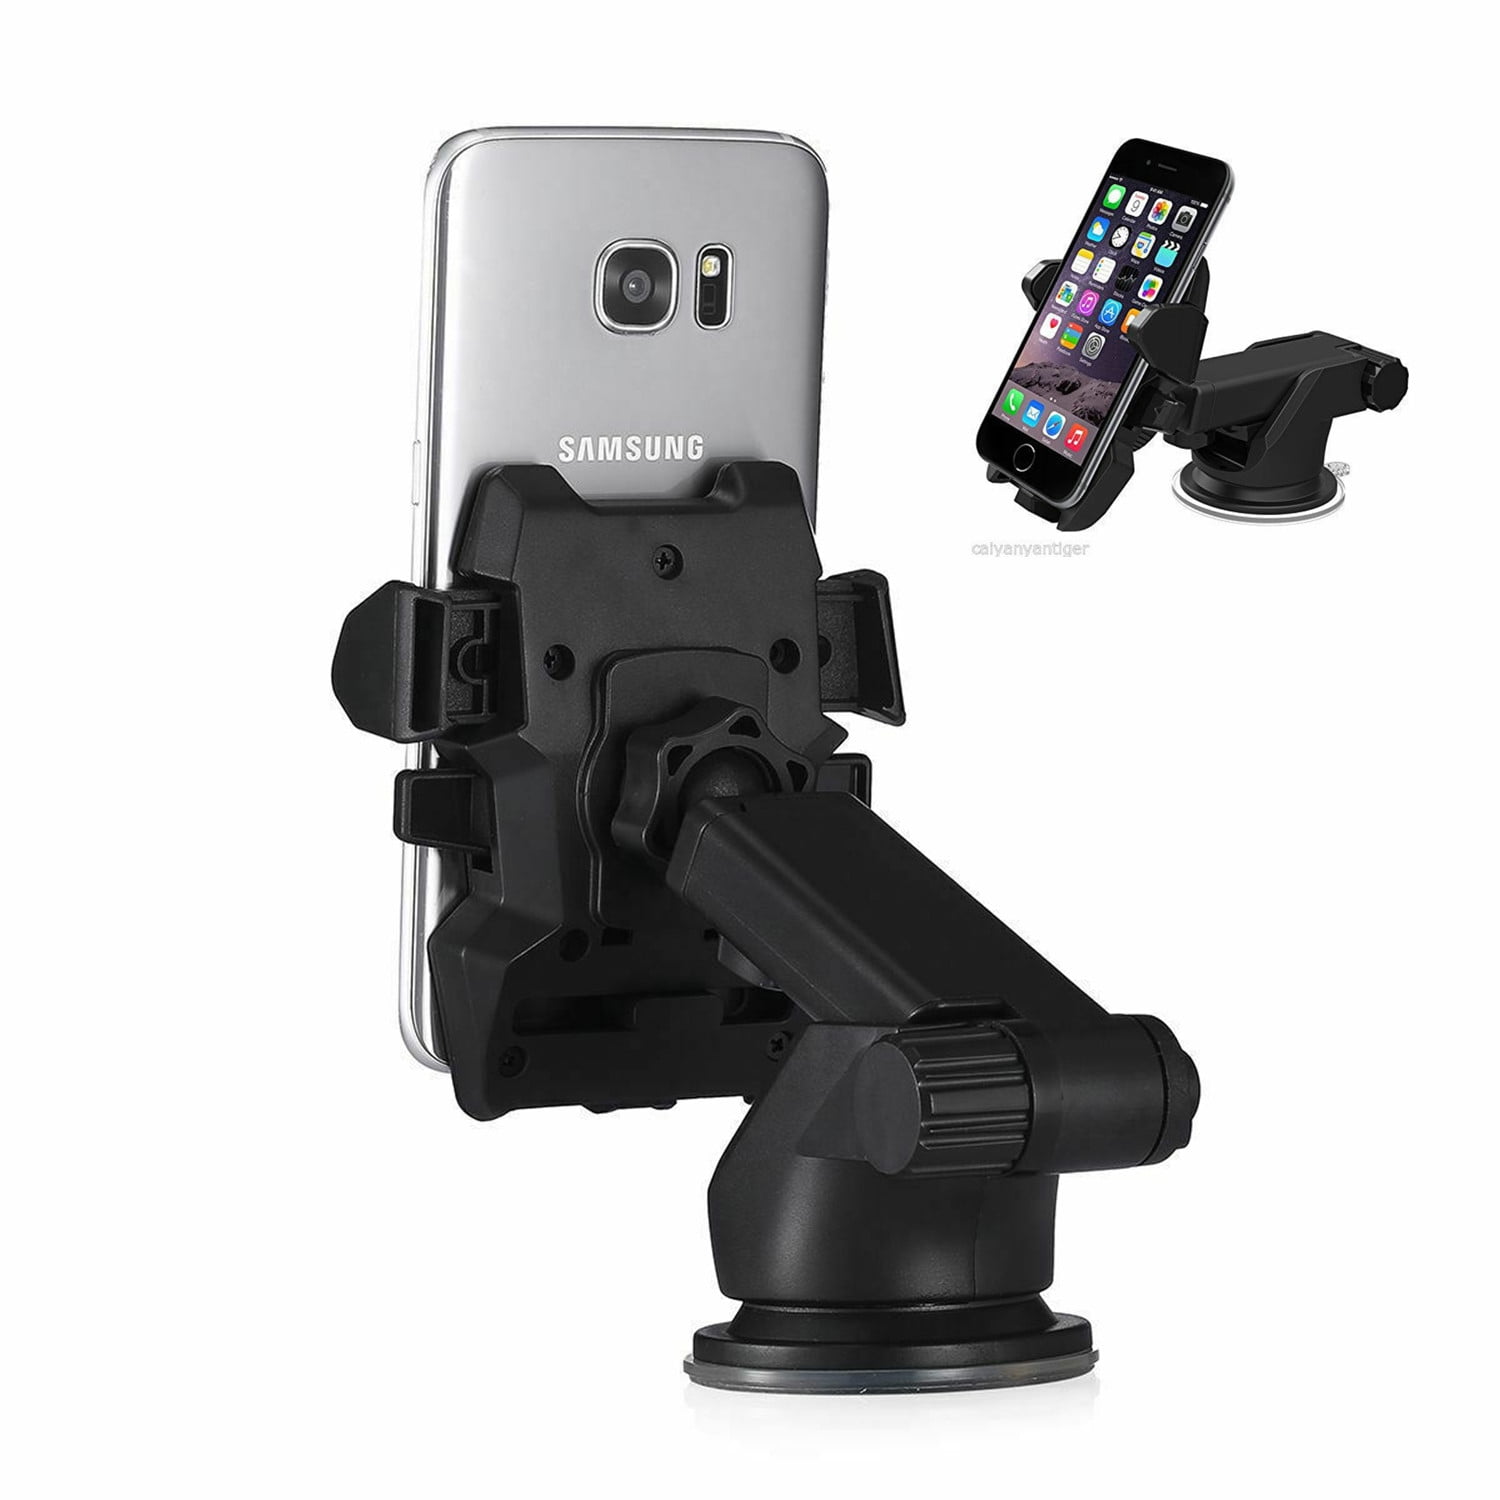 SE 6s 6 7 7 6 5s 4 Samsung Galaxy S10 S9 S8 S7 S6 S5 S4 Huawei and More 【2020 Newest Version !】 Car Phone Mount Phone Holder for Car Universal Smartphone Compatible with iPhone Xs XS Max XR X 8 8 